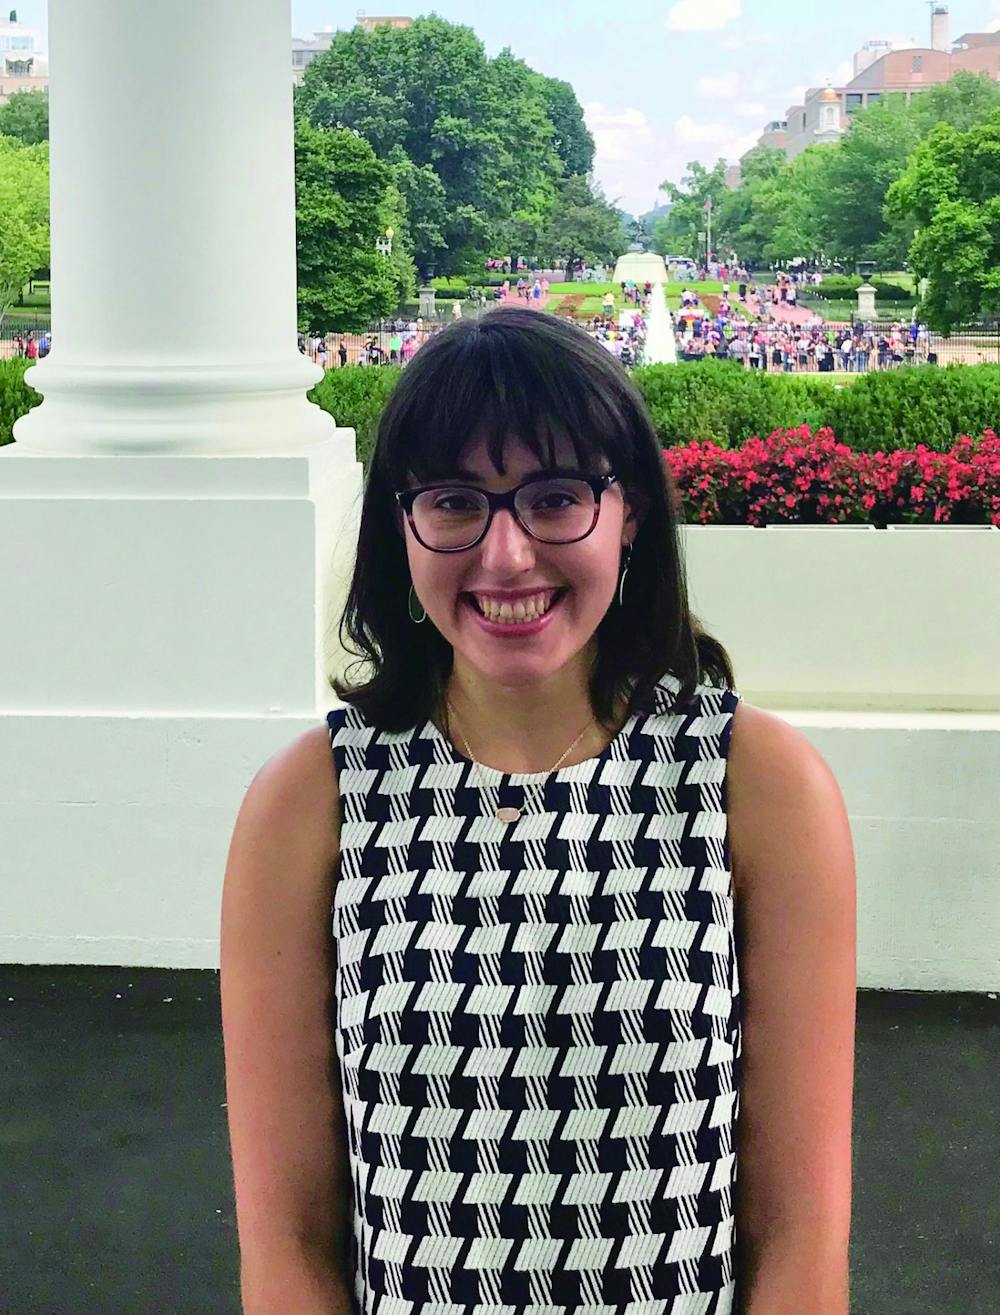 Senior political science major Lydia Kotowski spent her summer in D.C. with an internship through The Fund for American Studies. There, Kotowski researched and designed social media campaigns for the Washington Council of Lawyers. Lydia Kotowski, Photo Provided